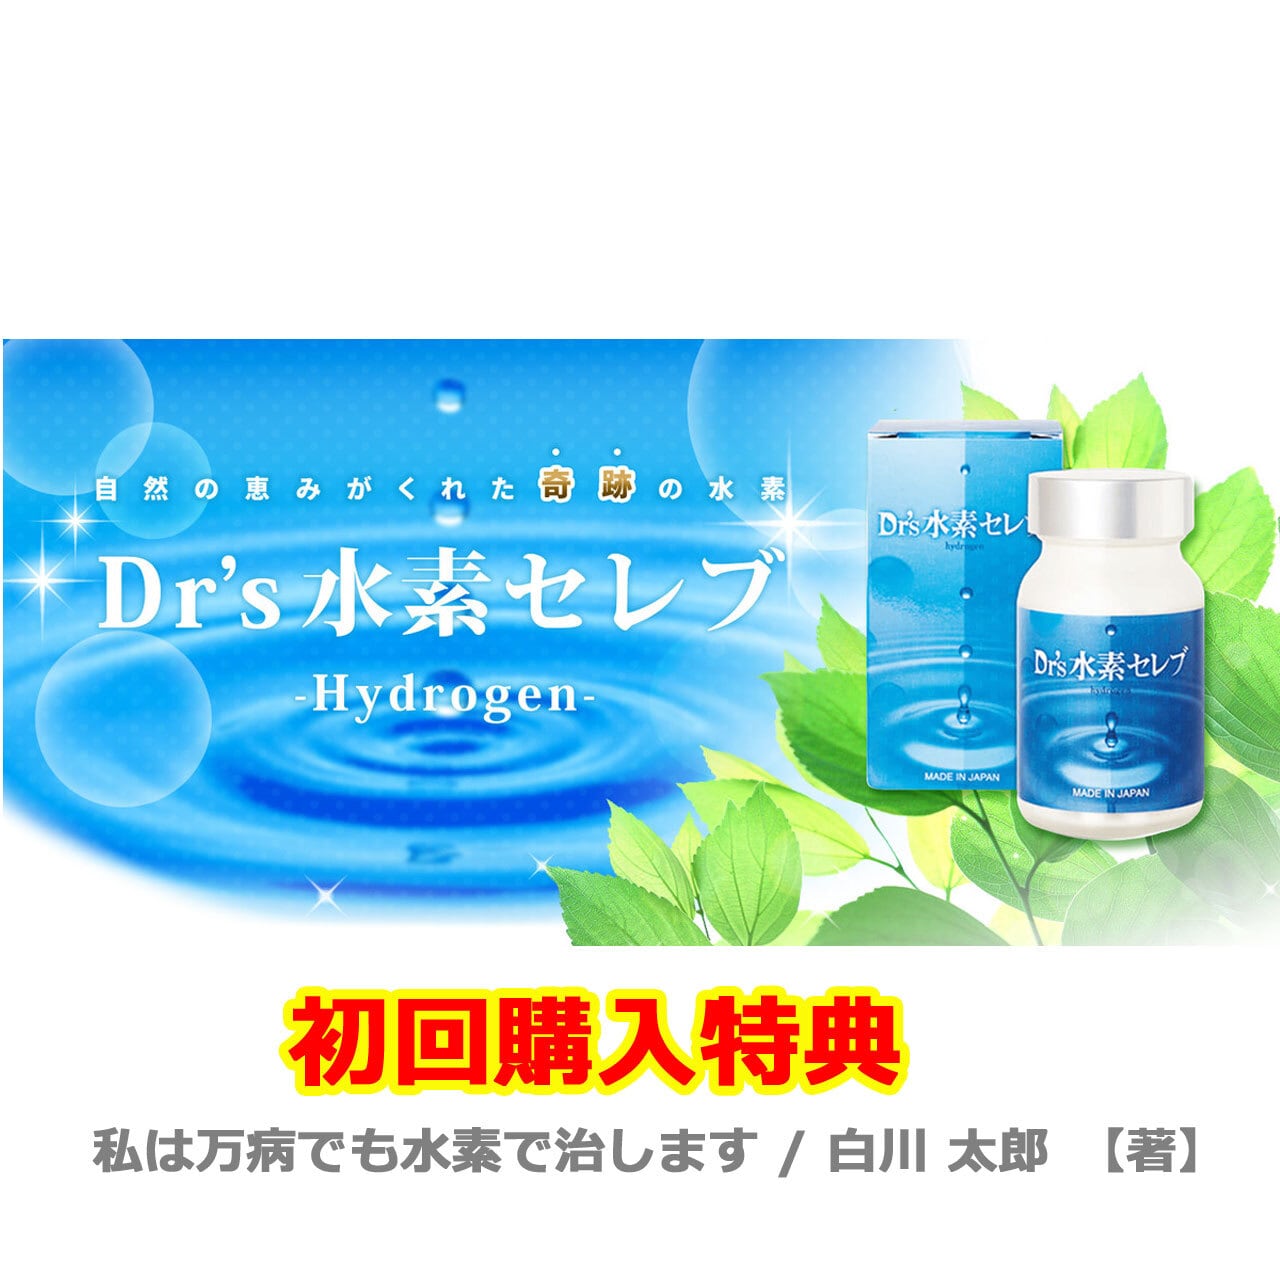 Dr's 水素セレブ　10箱セット